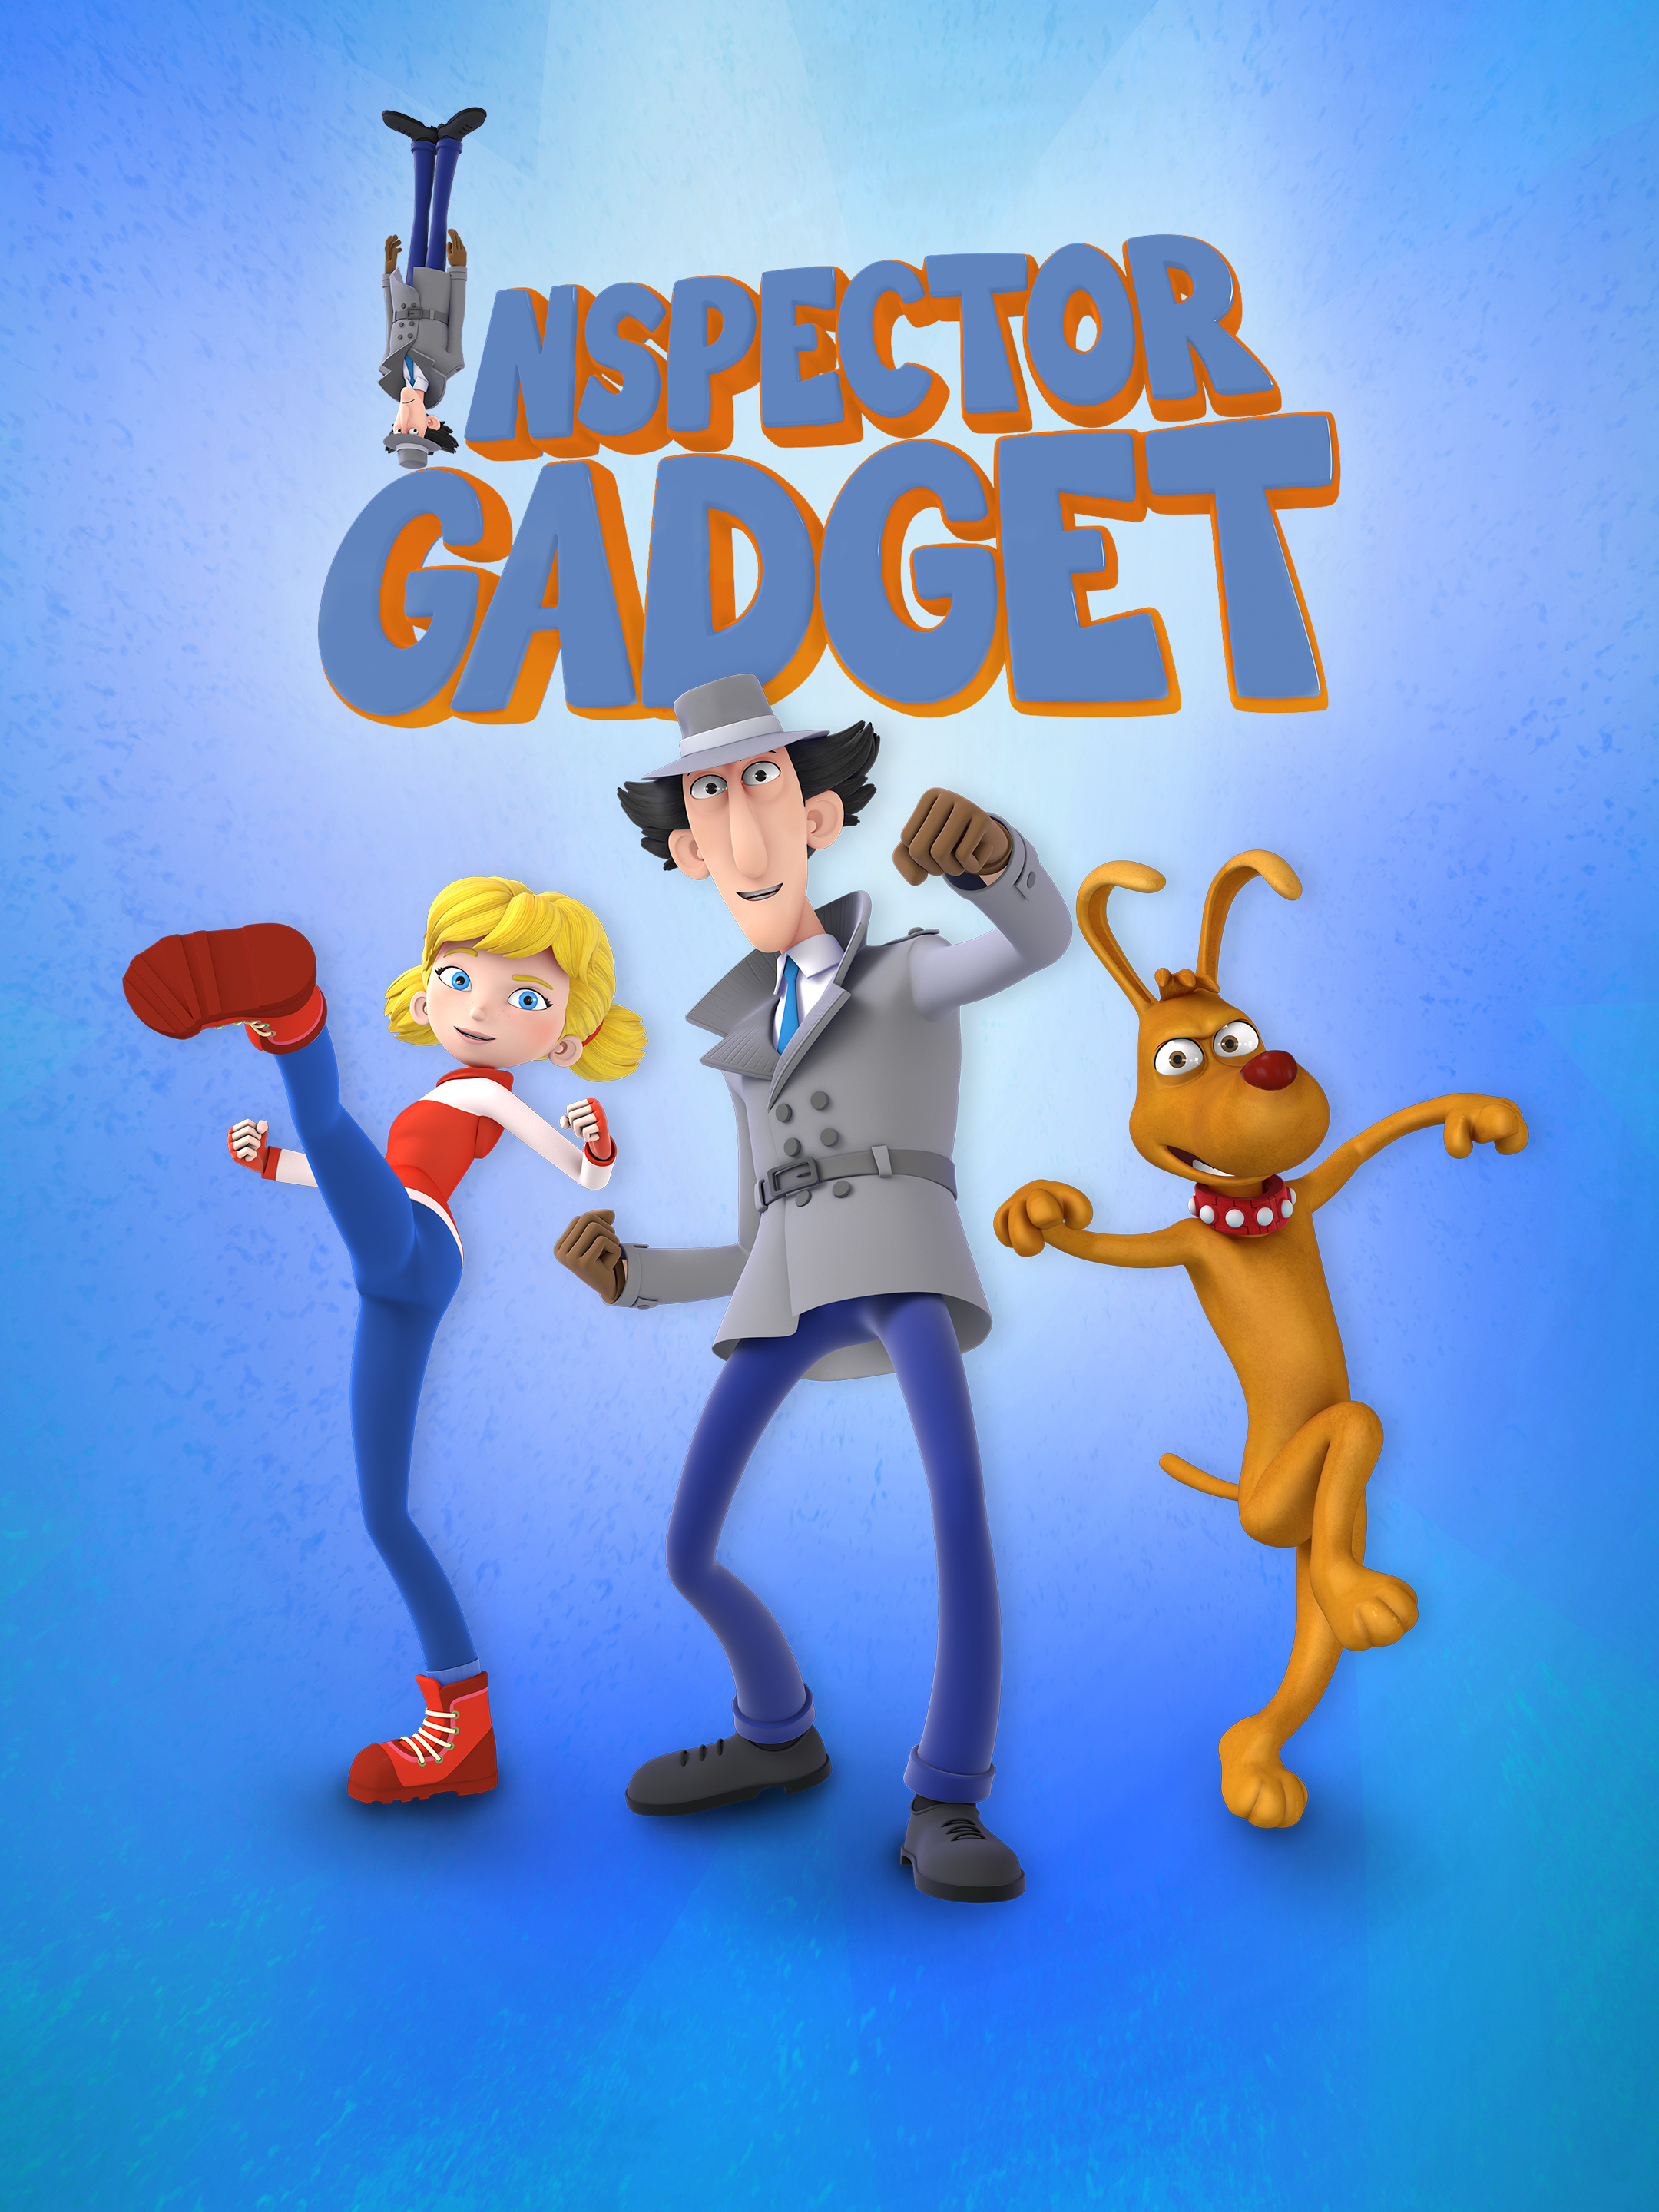 Inspector Gadget, Full cast, TV guide, Animated series, 2160x2880 HD Phone